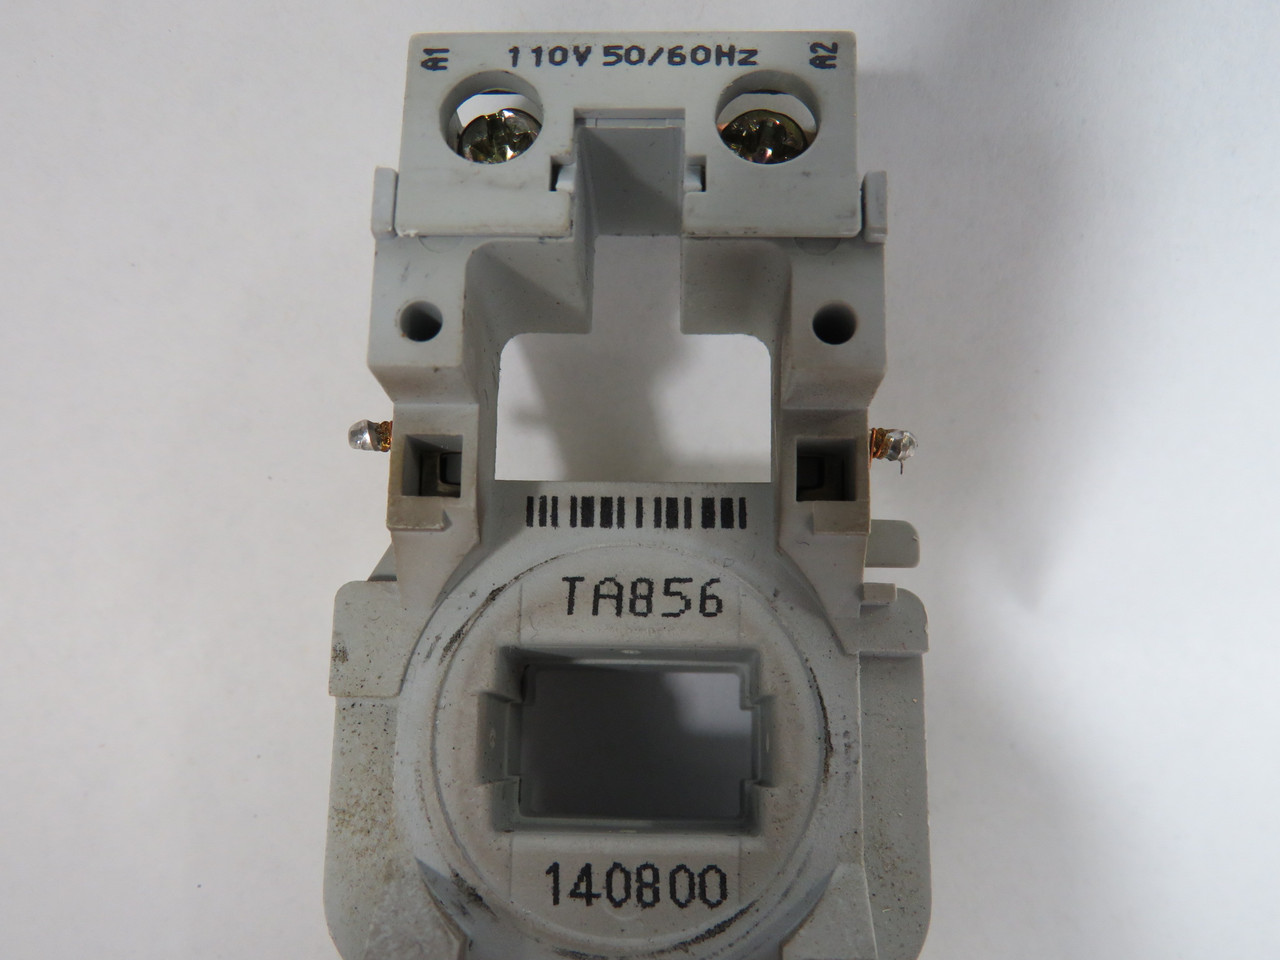 Allen-Bradley TA856 Replacement Renewal Coil 110V 50/60Hz USED